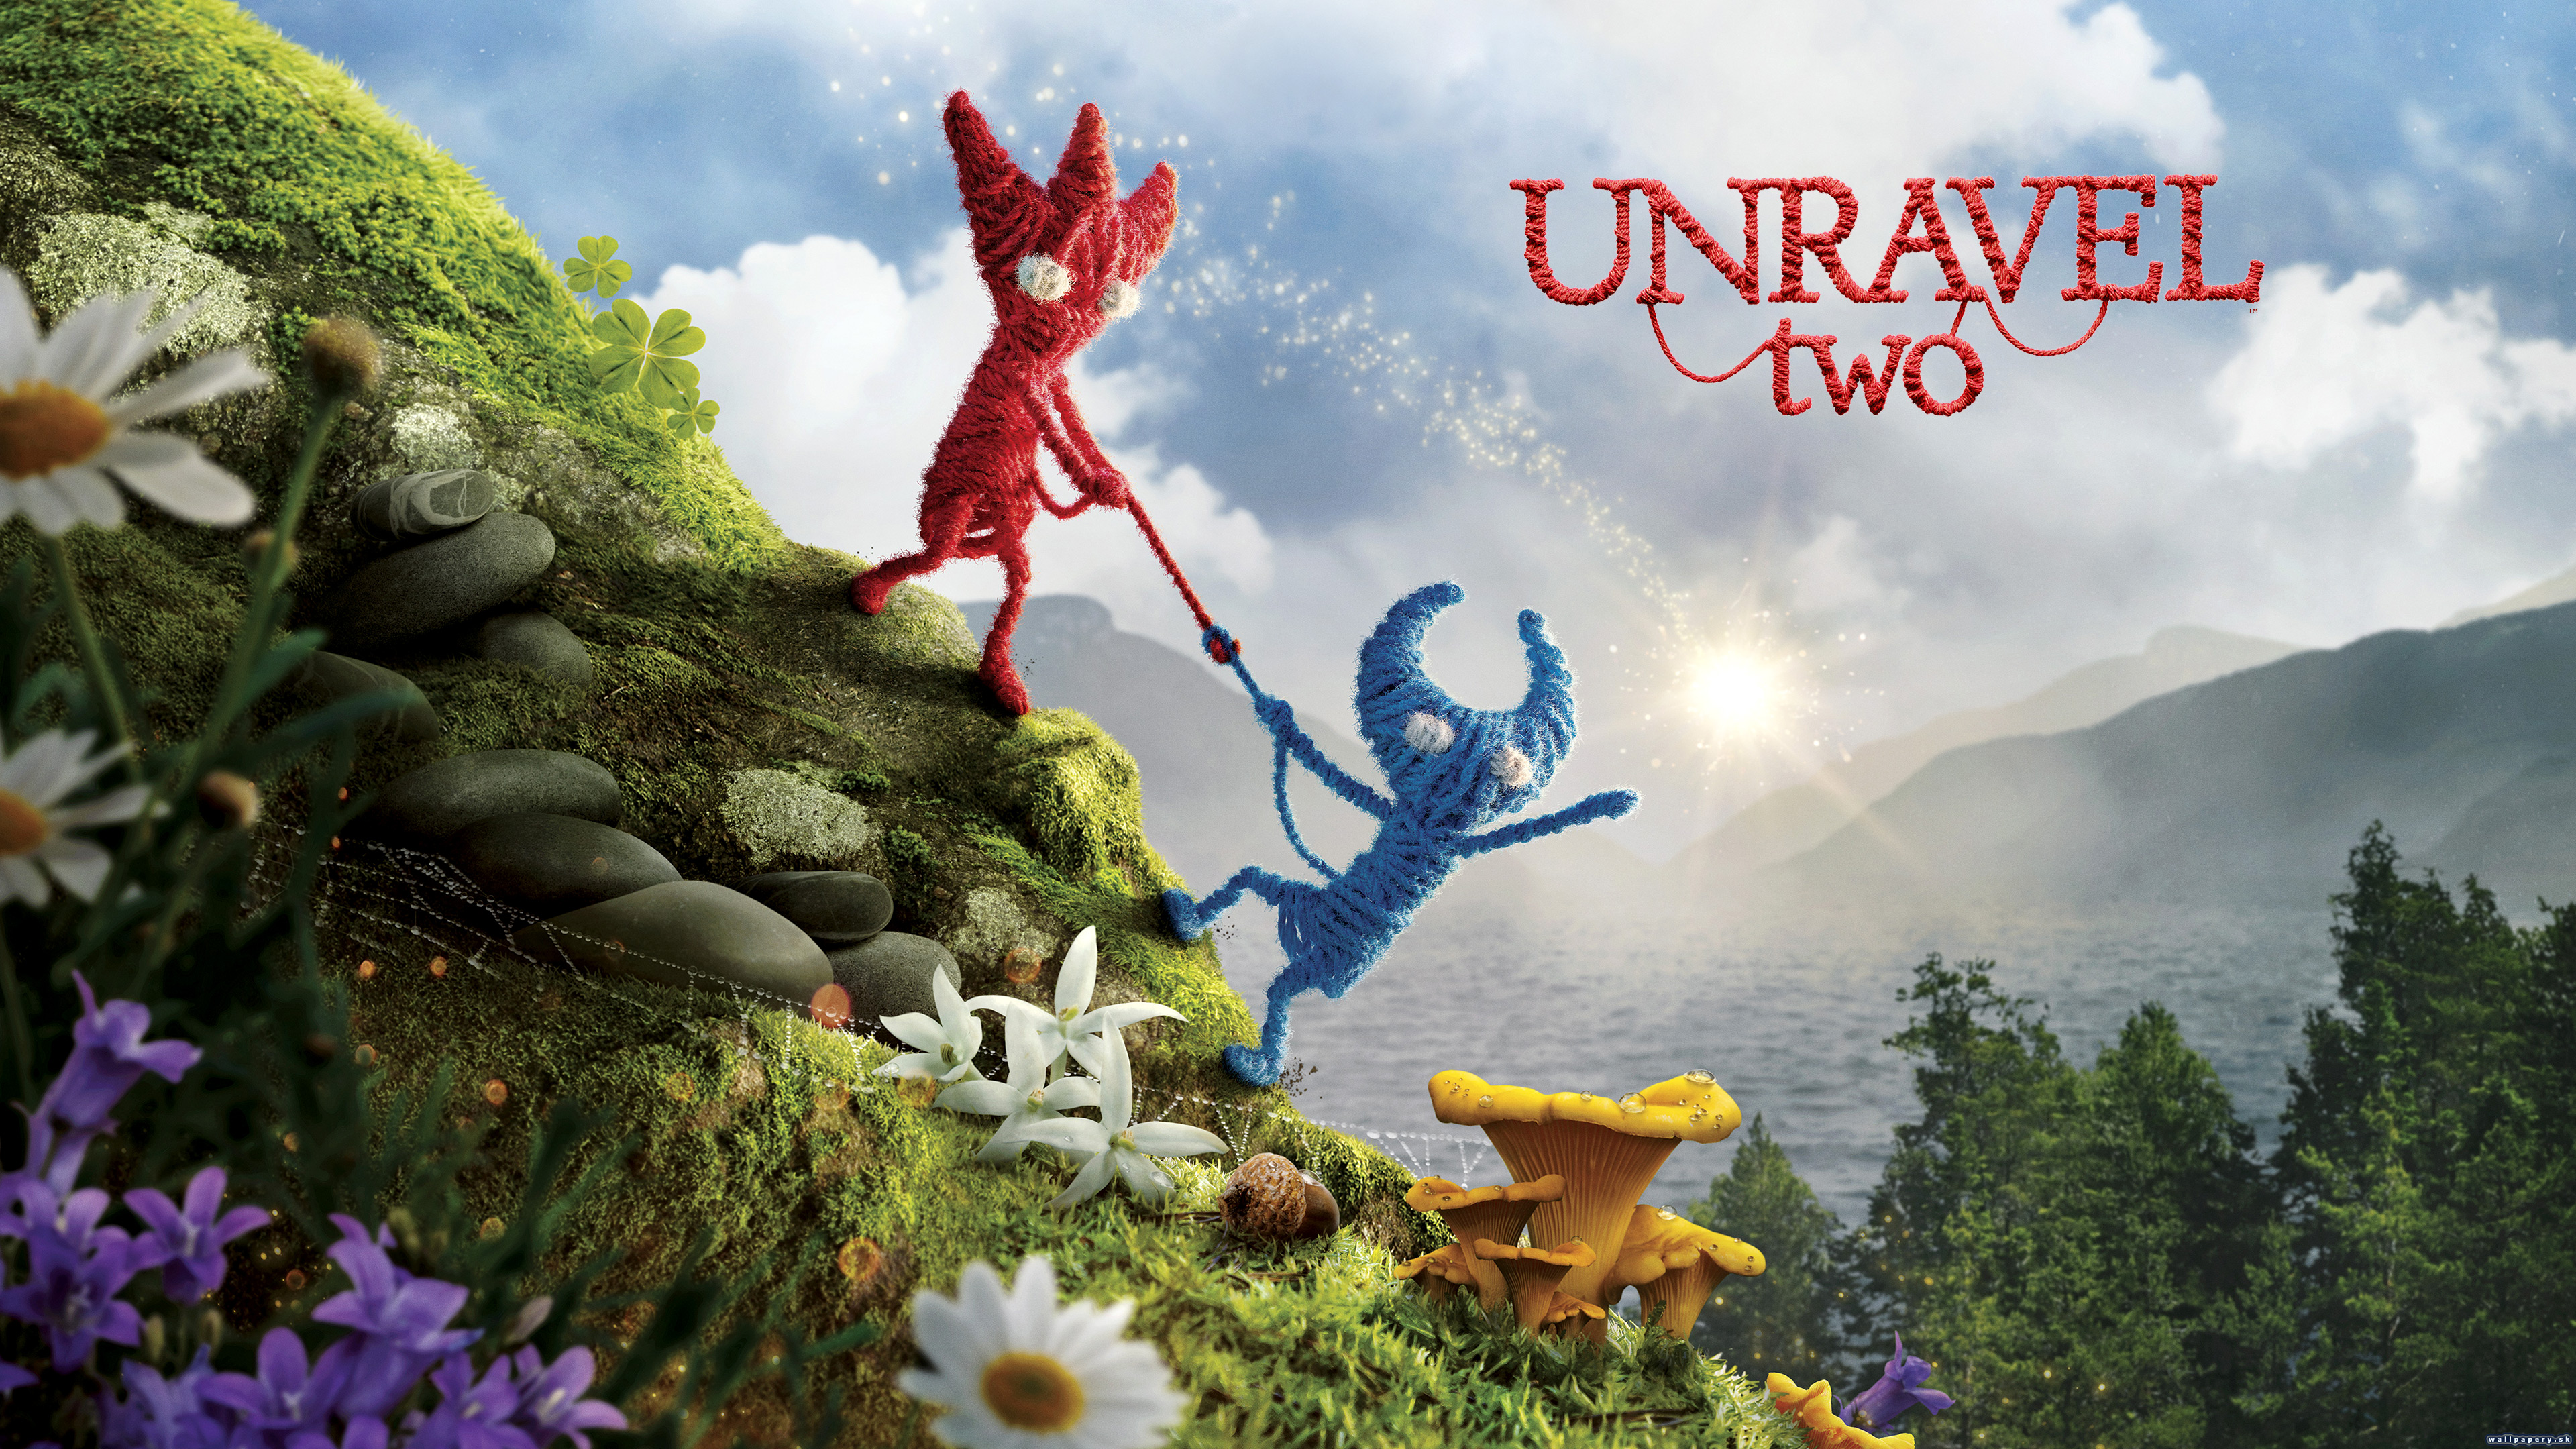 Unravel Two - wallpaper 1